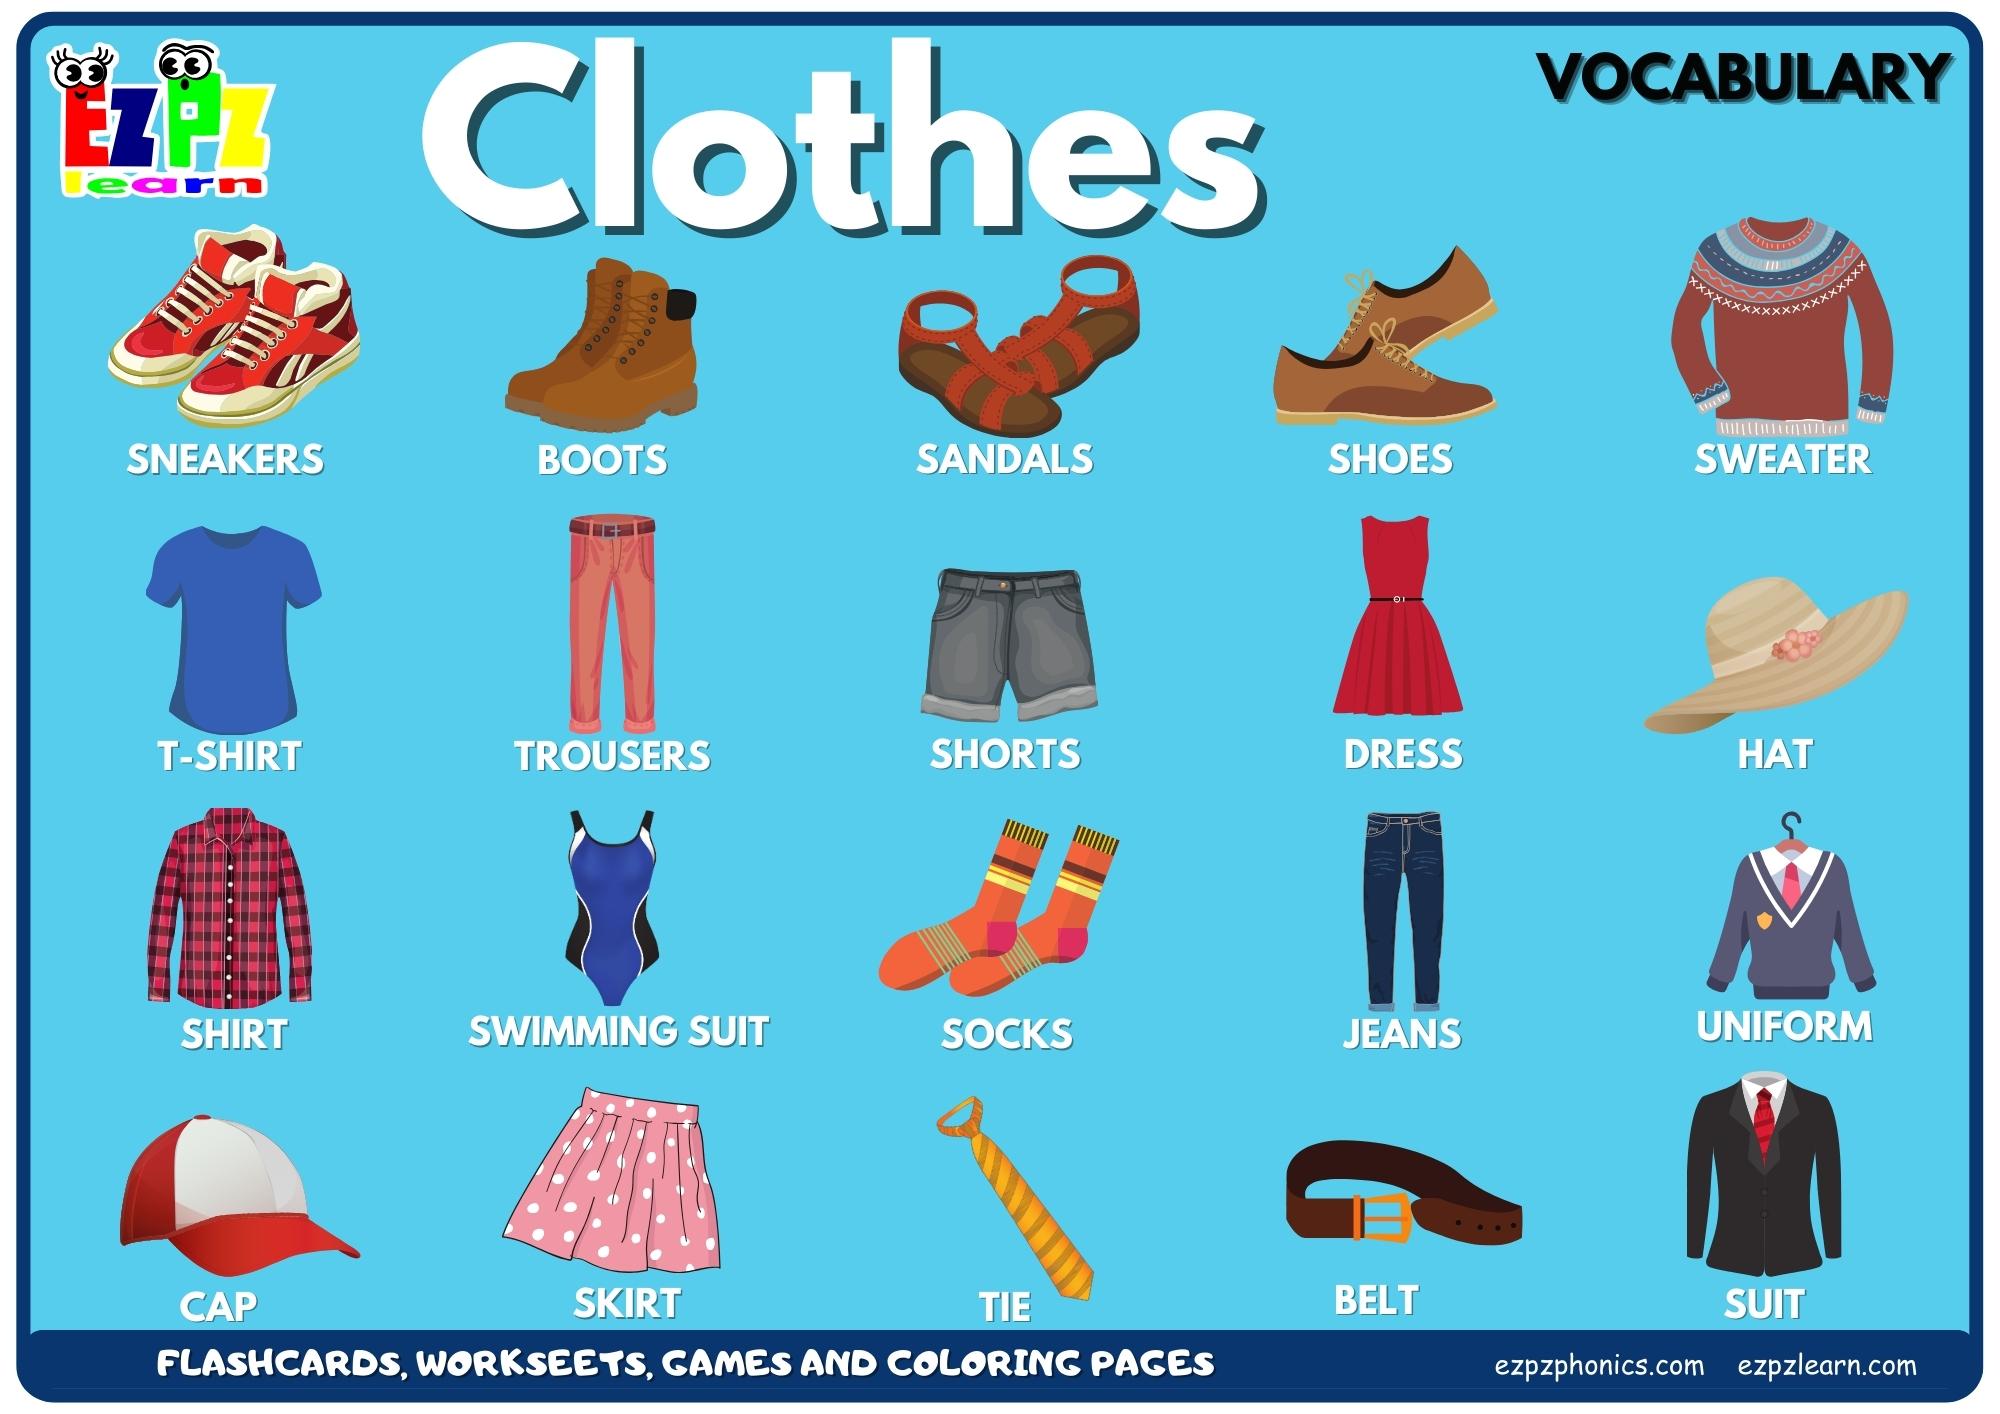 CLOTHING VOCABULARY for Beginners, Kids with Emojis - Learn Names of Clothes  in English 